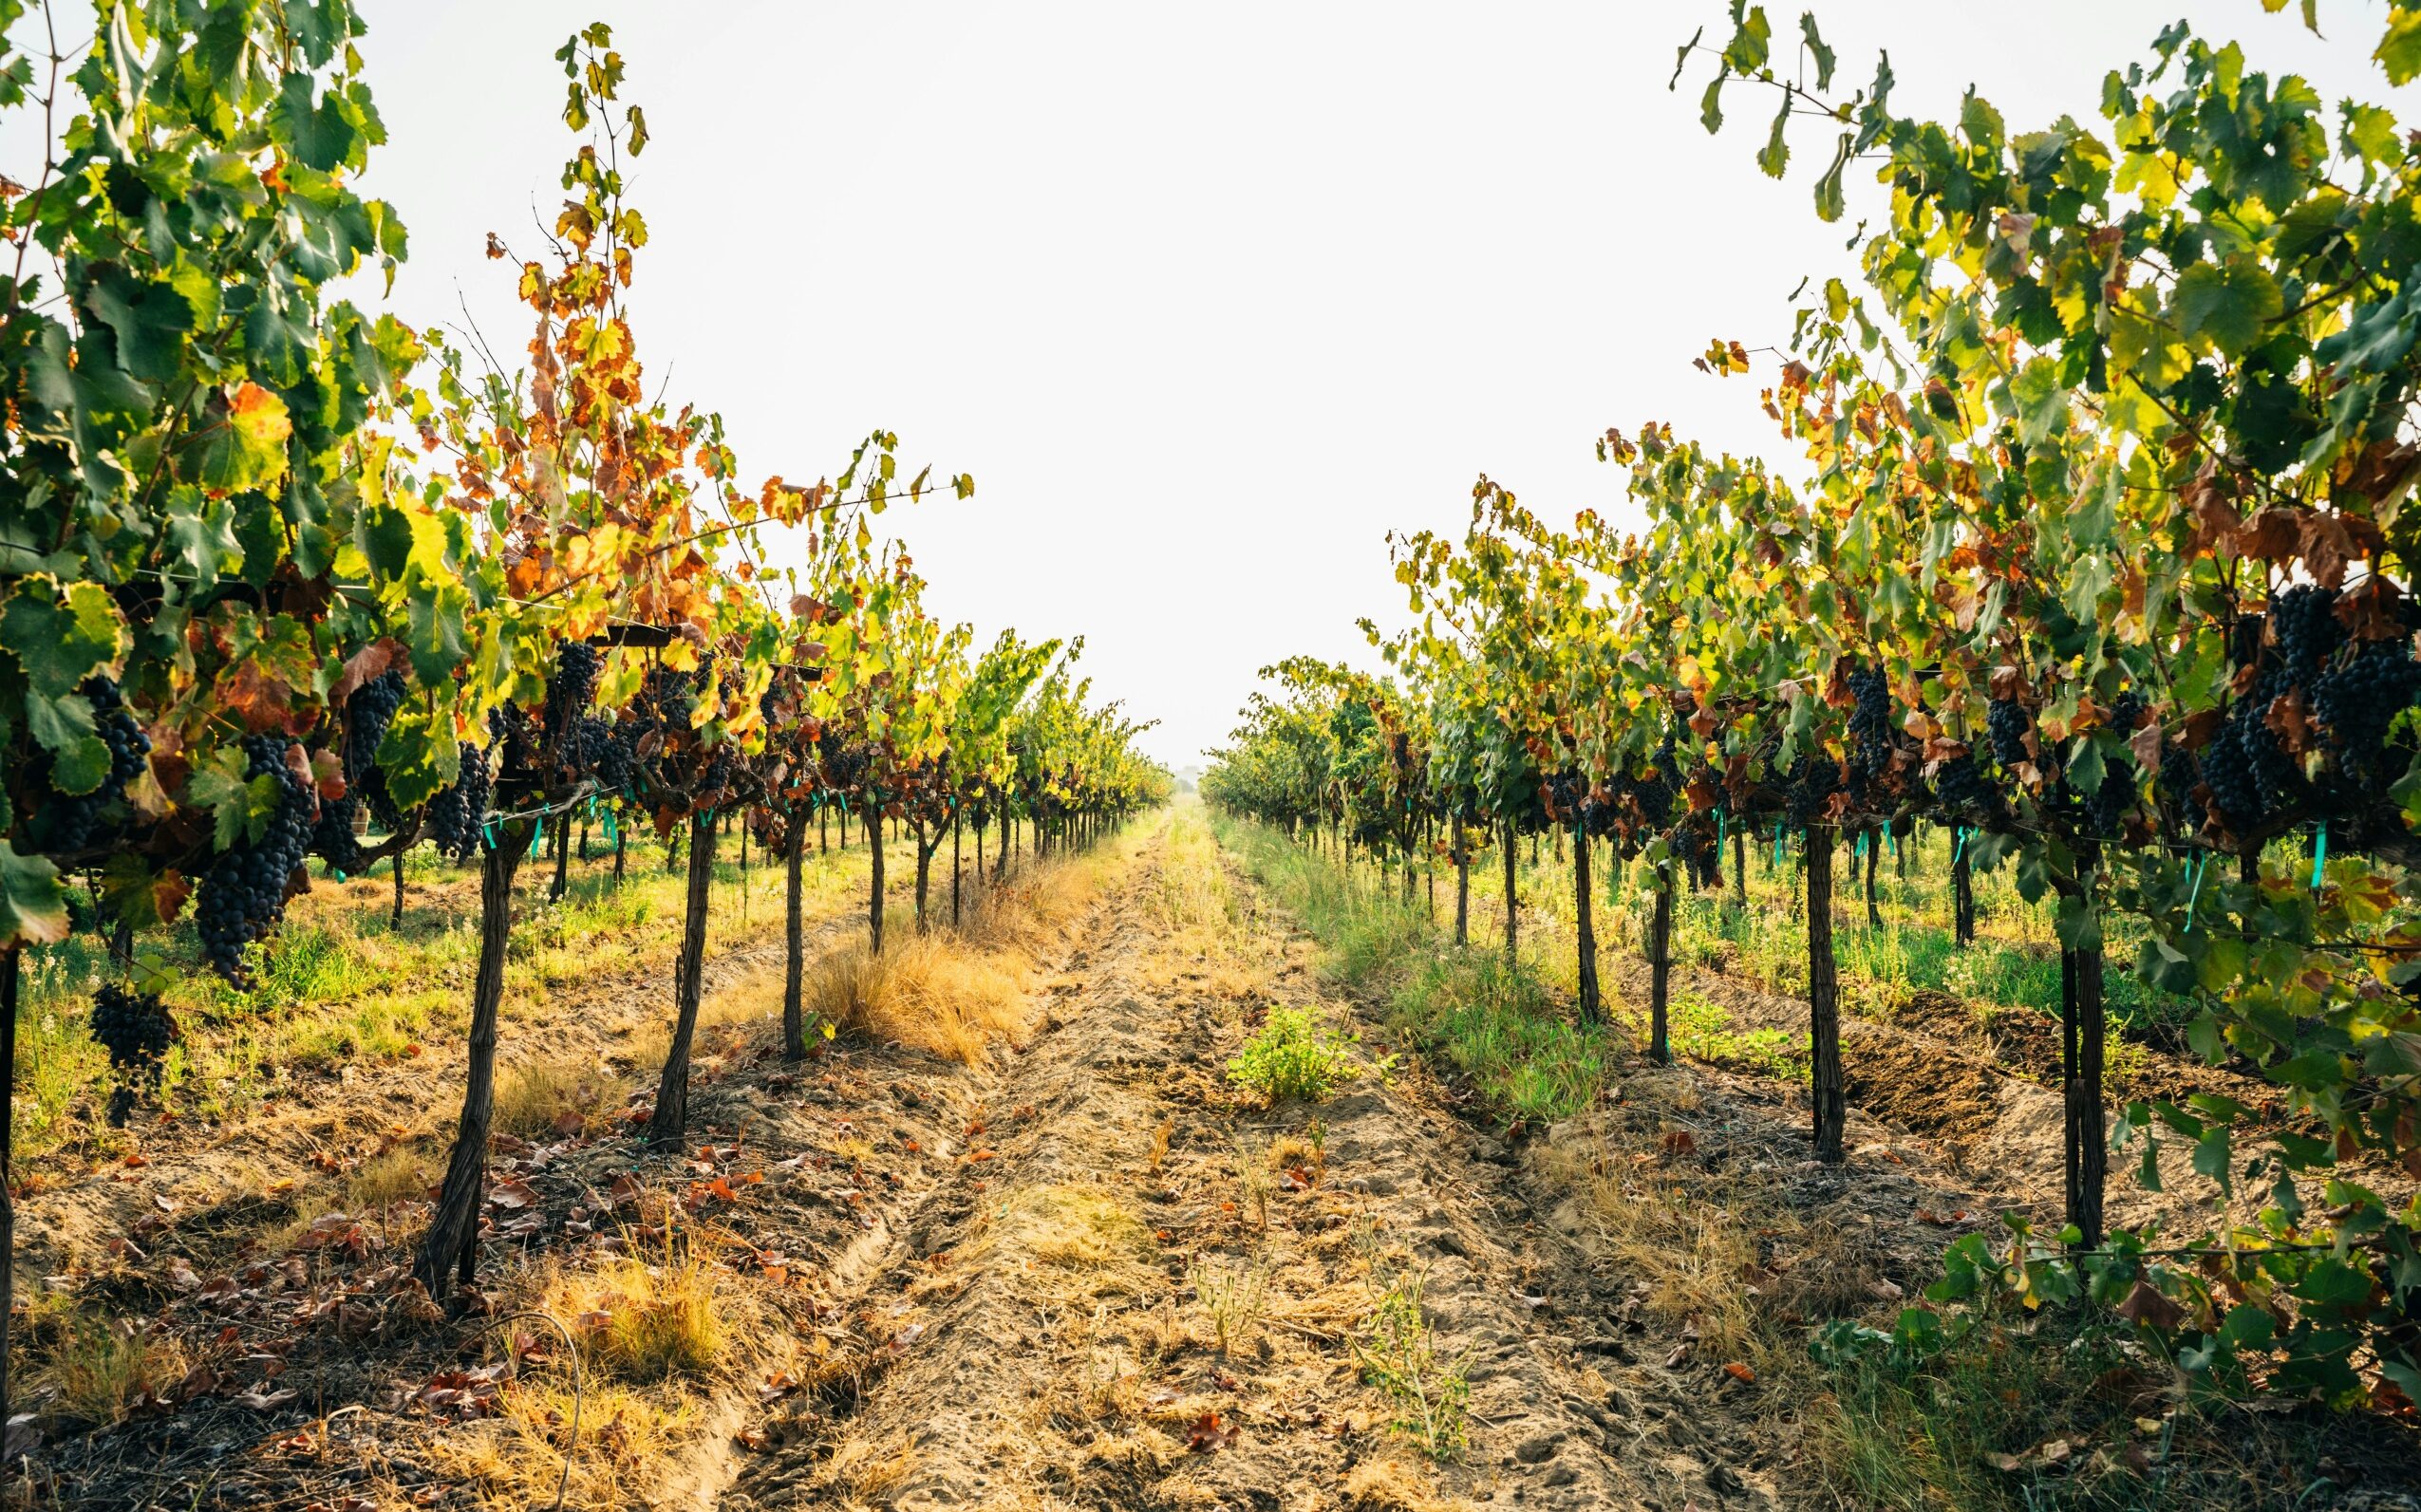 Where to Find California’s Most Underrated Vineyards